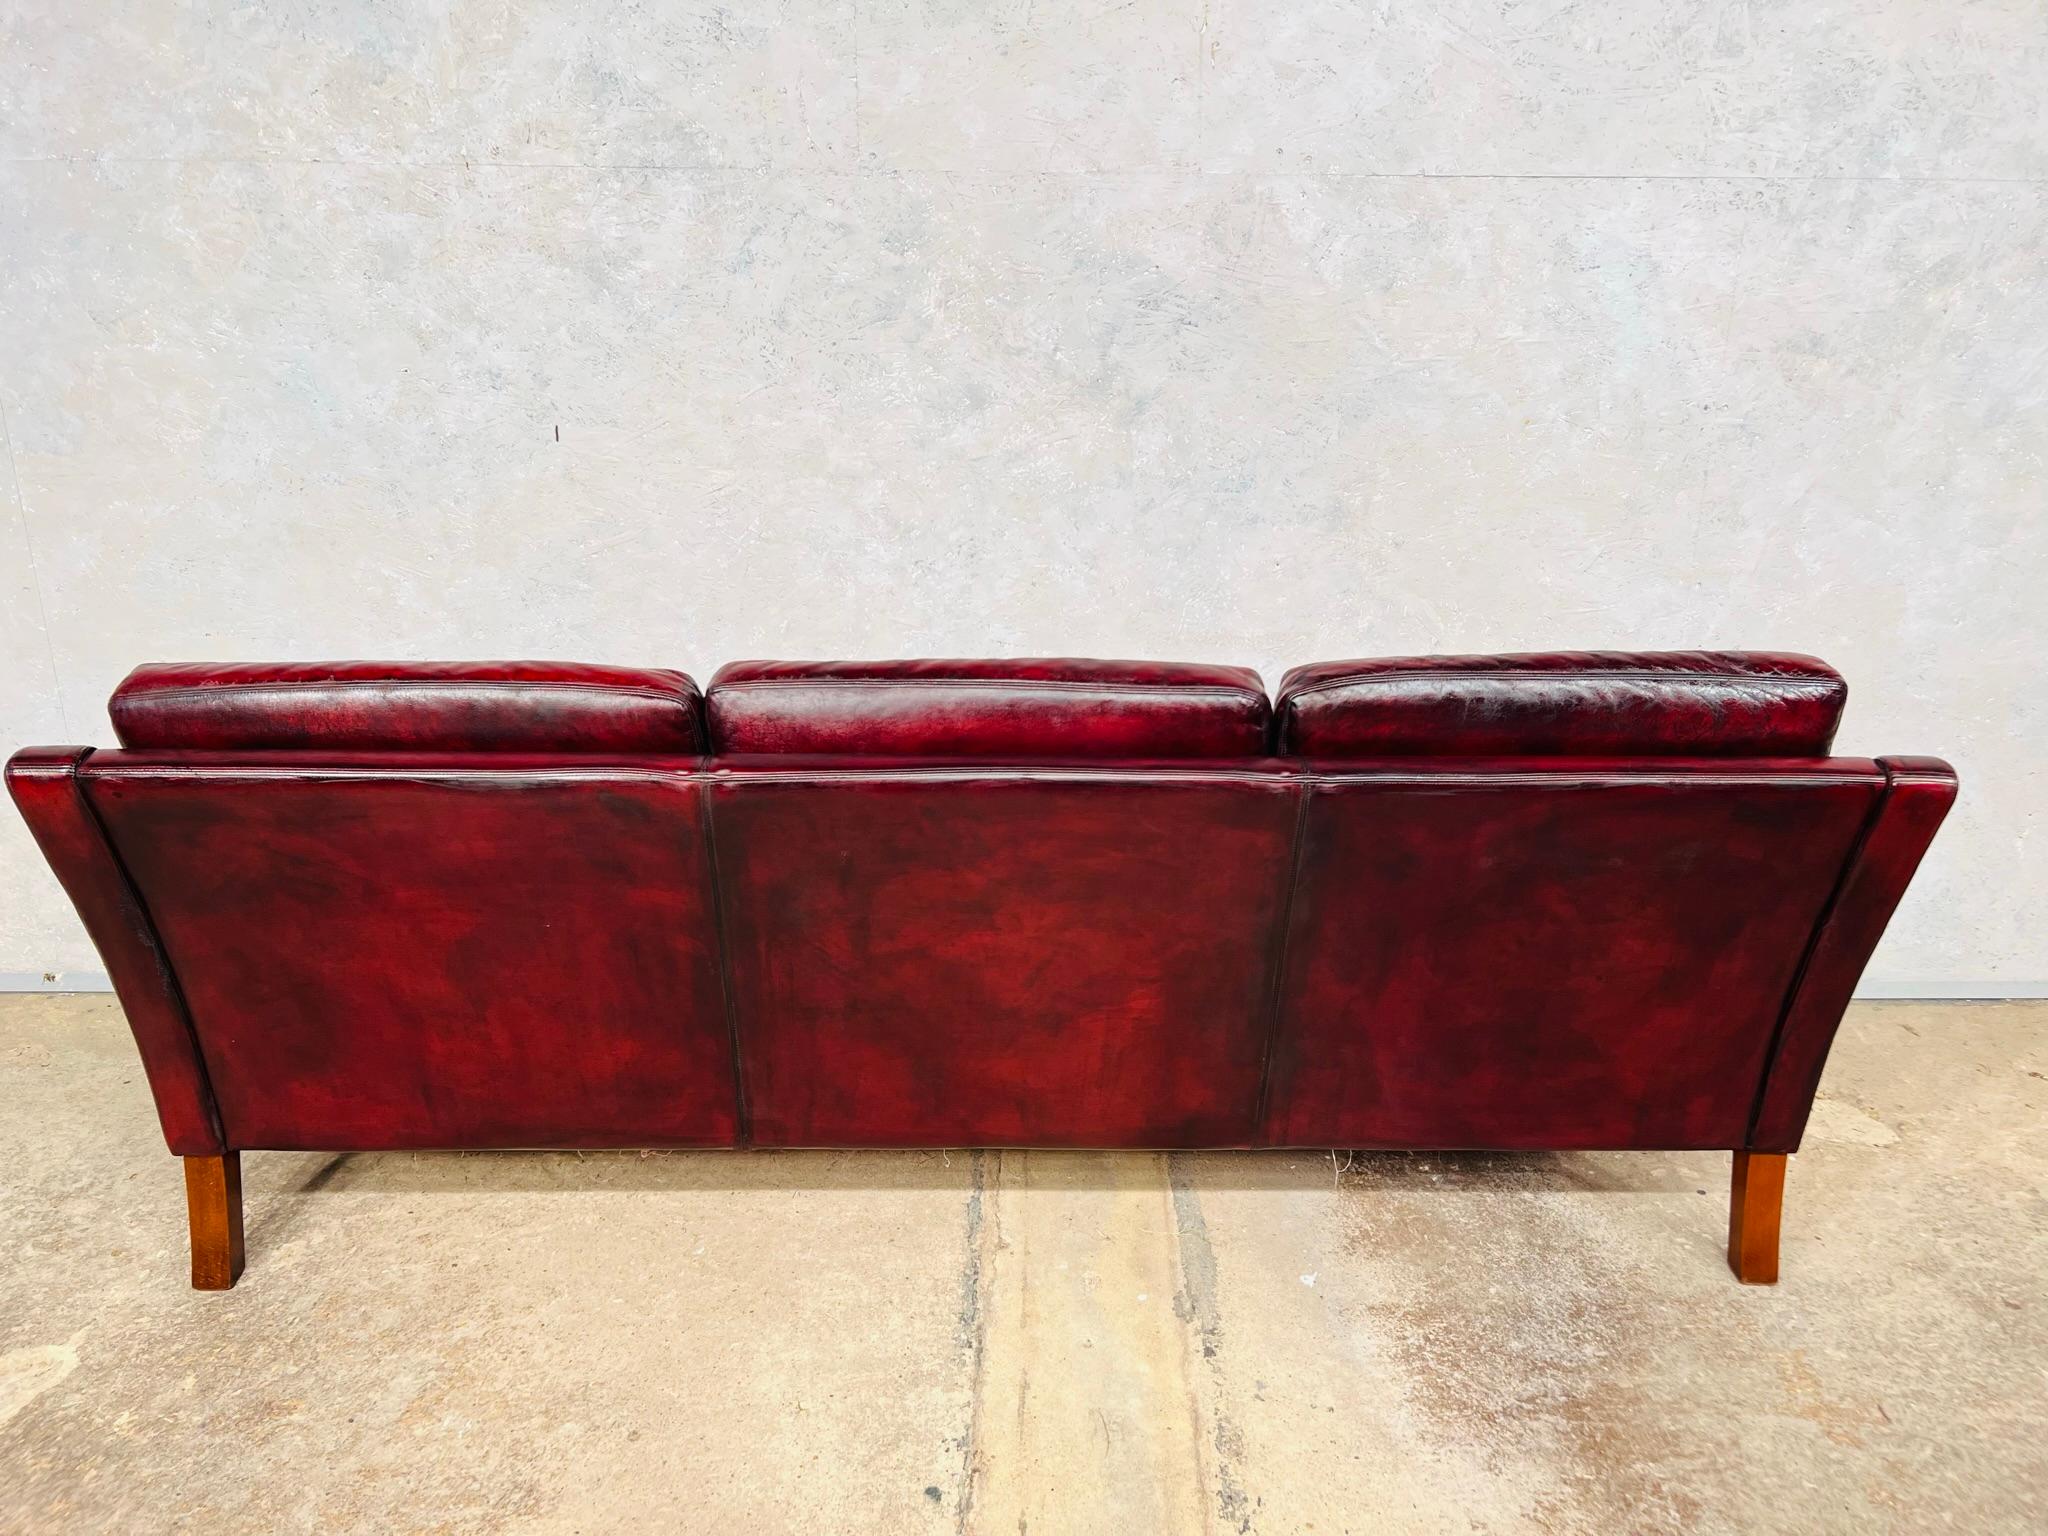 A Compact Vintage Danish 1970s Deep Red Three Seater Leather Sofa For Sale 5